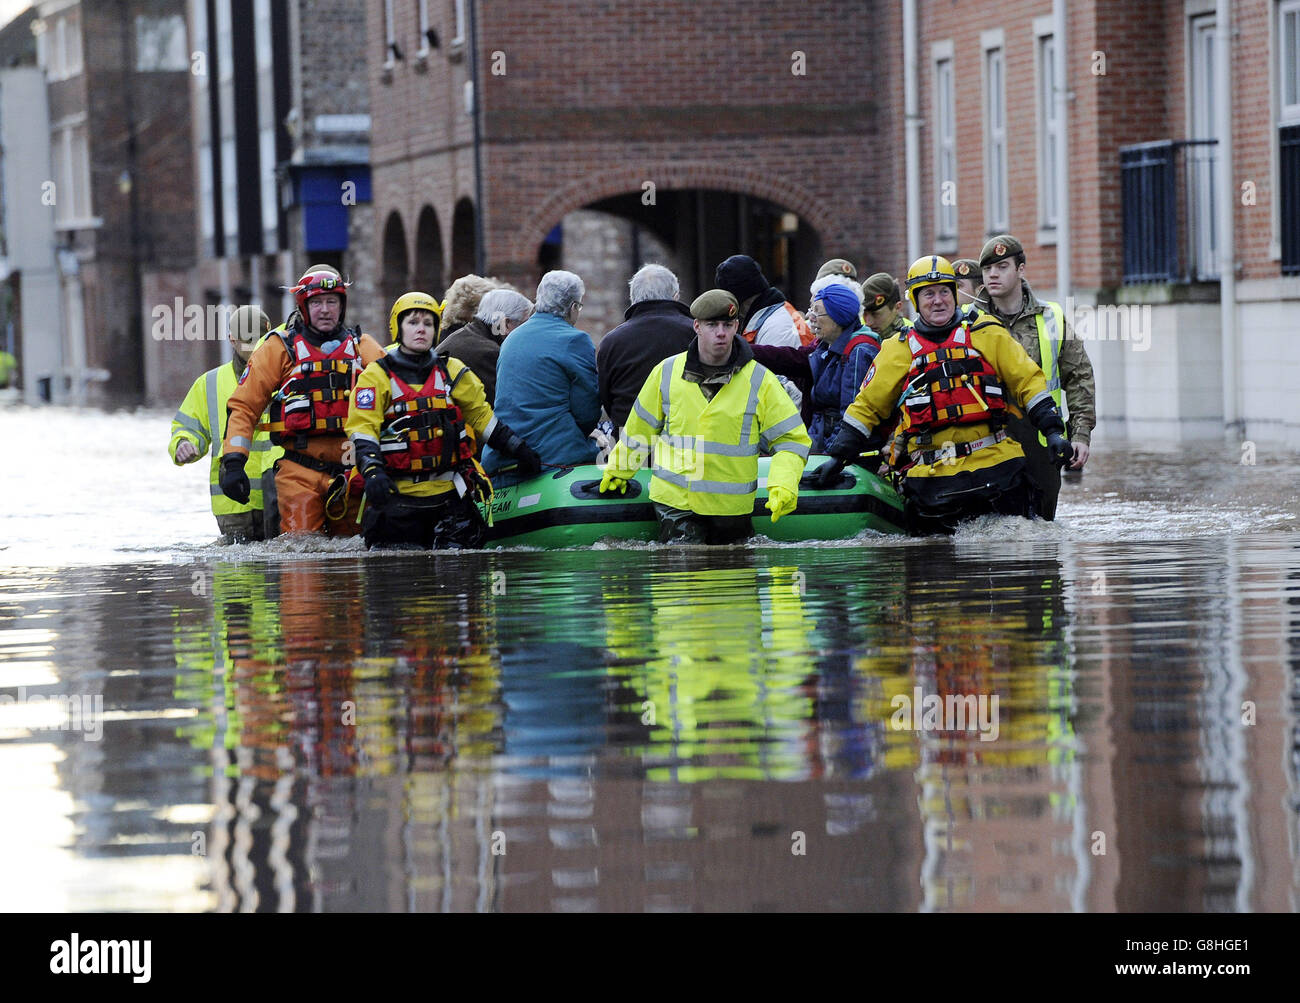 Members of the Army and rescue teams help evacuate people from flooded properties after they became trapped by rising floodwater when the River Ouse bursts its banks in York city centre. Stock Photo